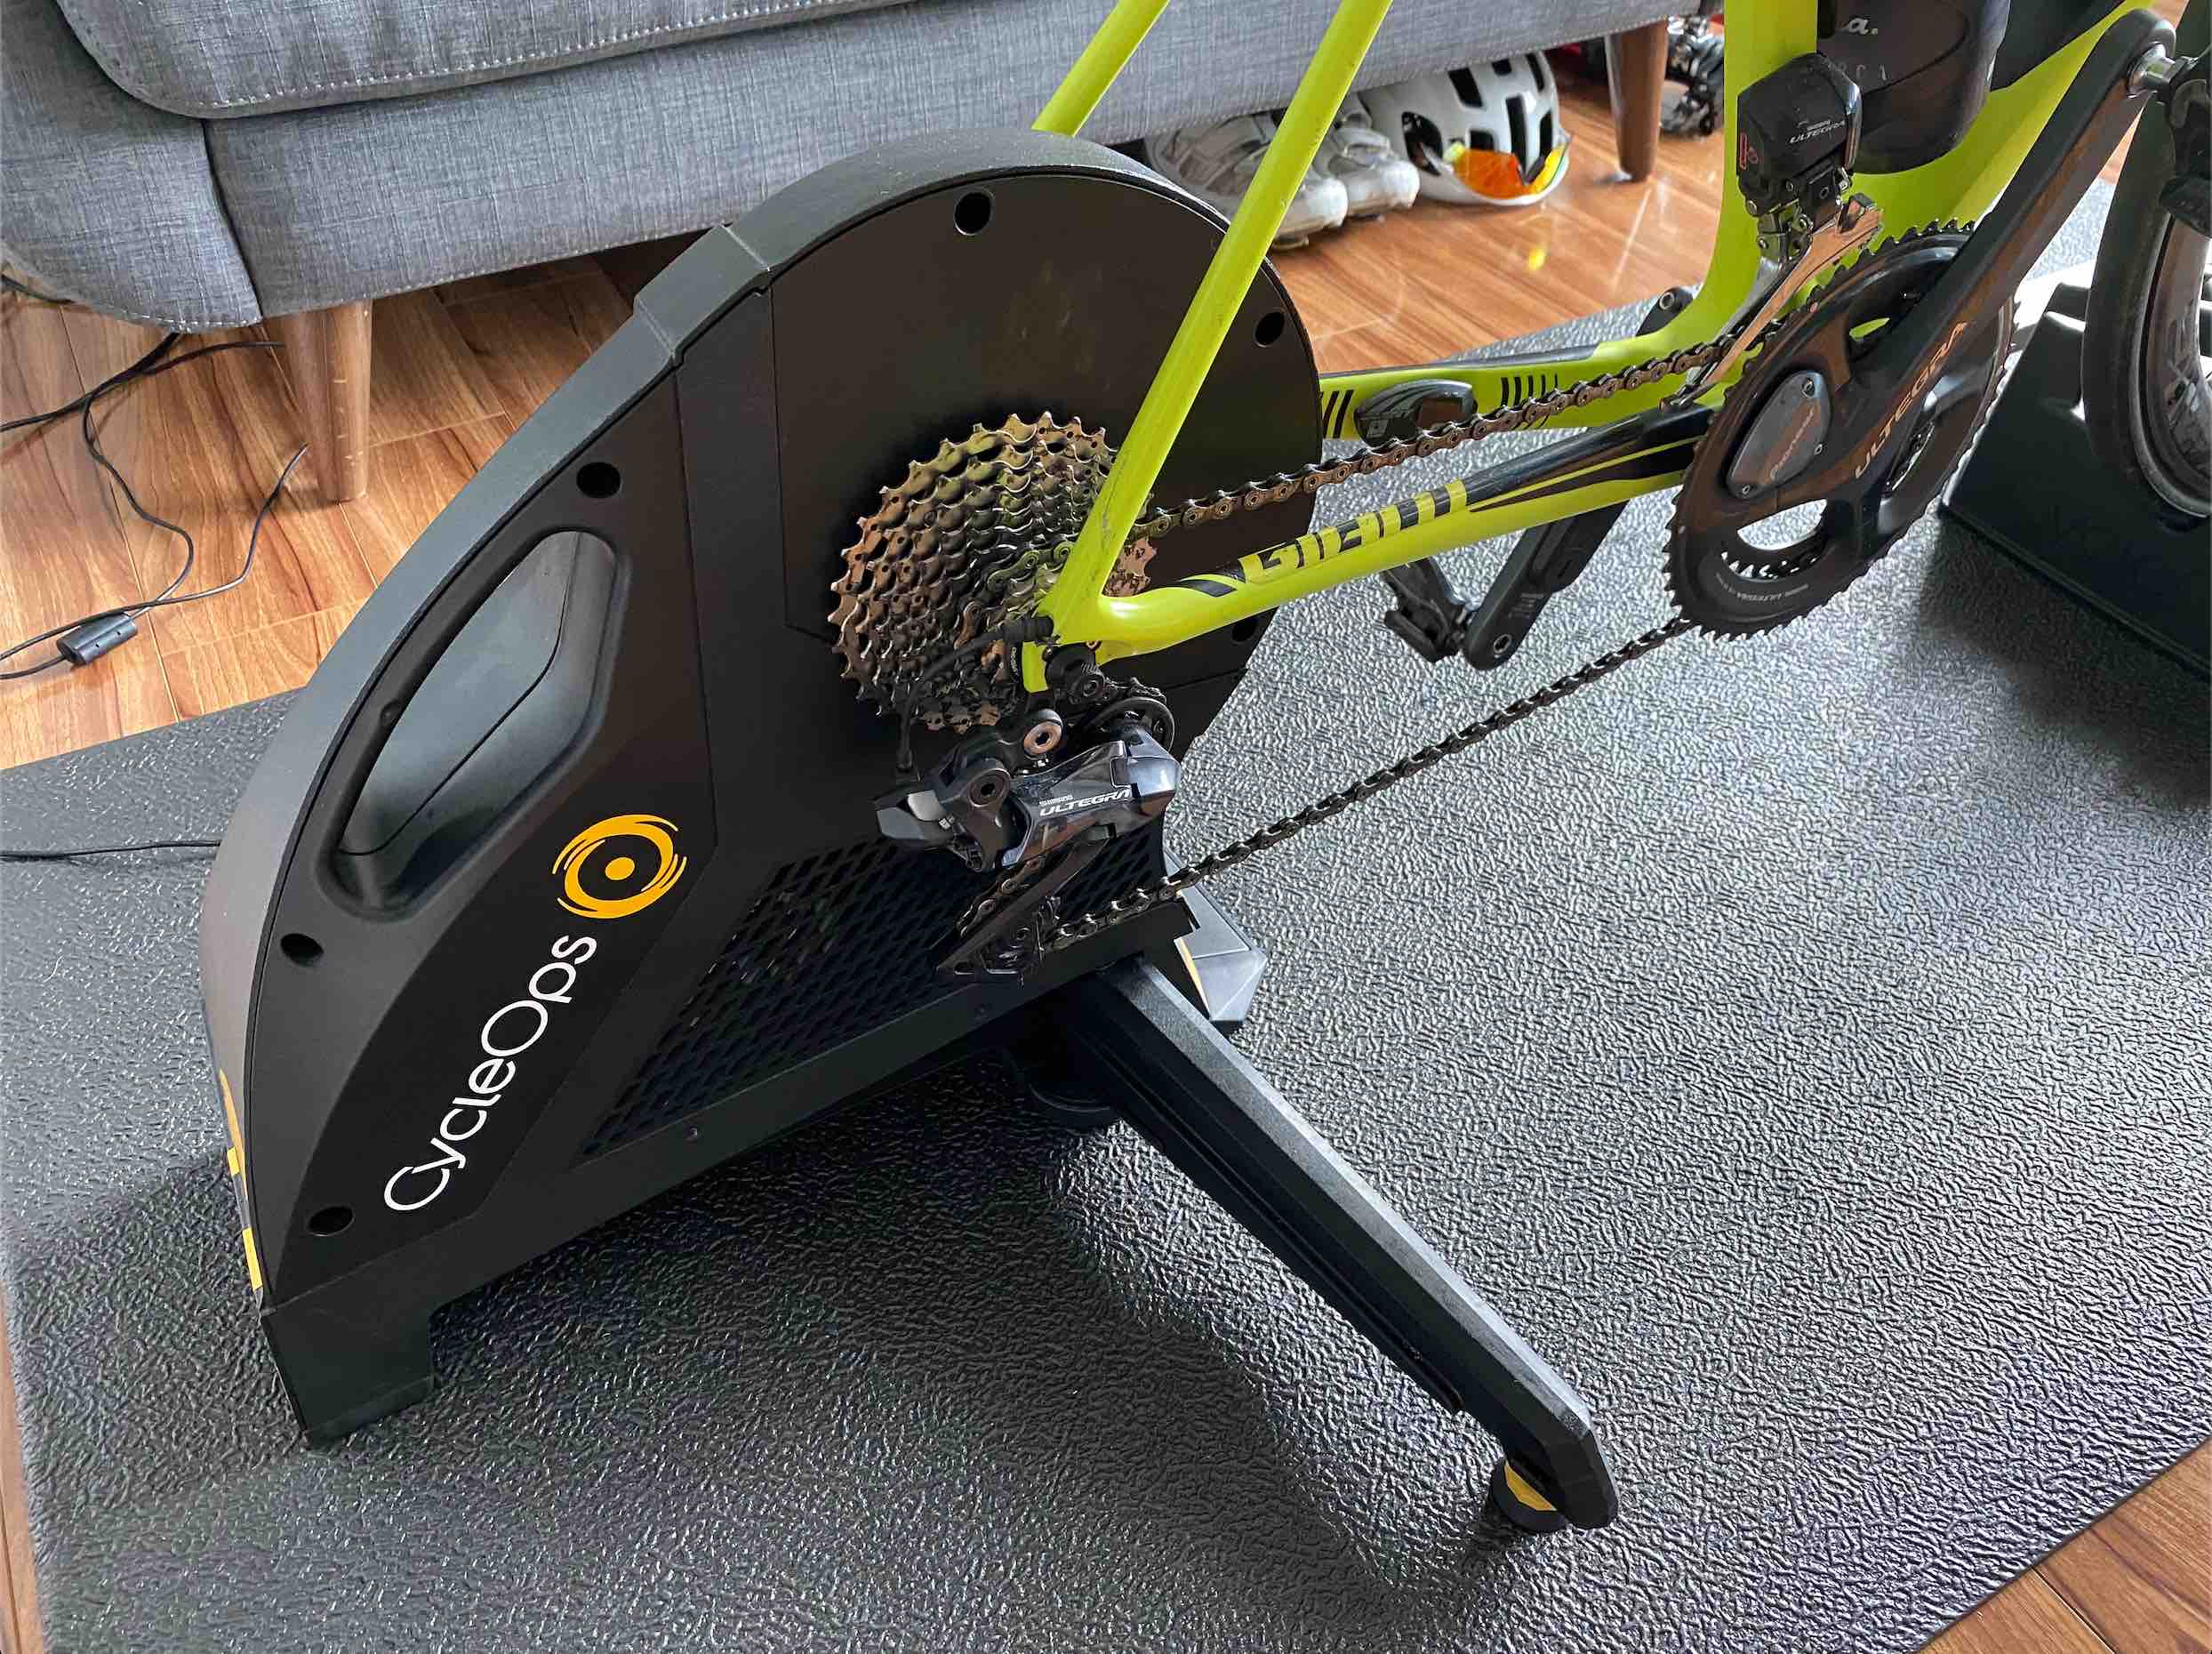 The CycleOps Hammer smart trainer with a Giant TCR bicycle mounted on to it